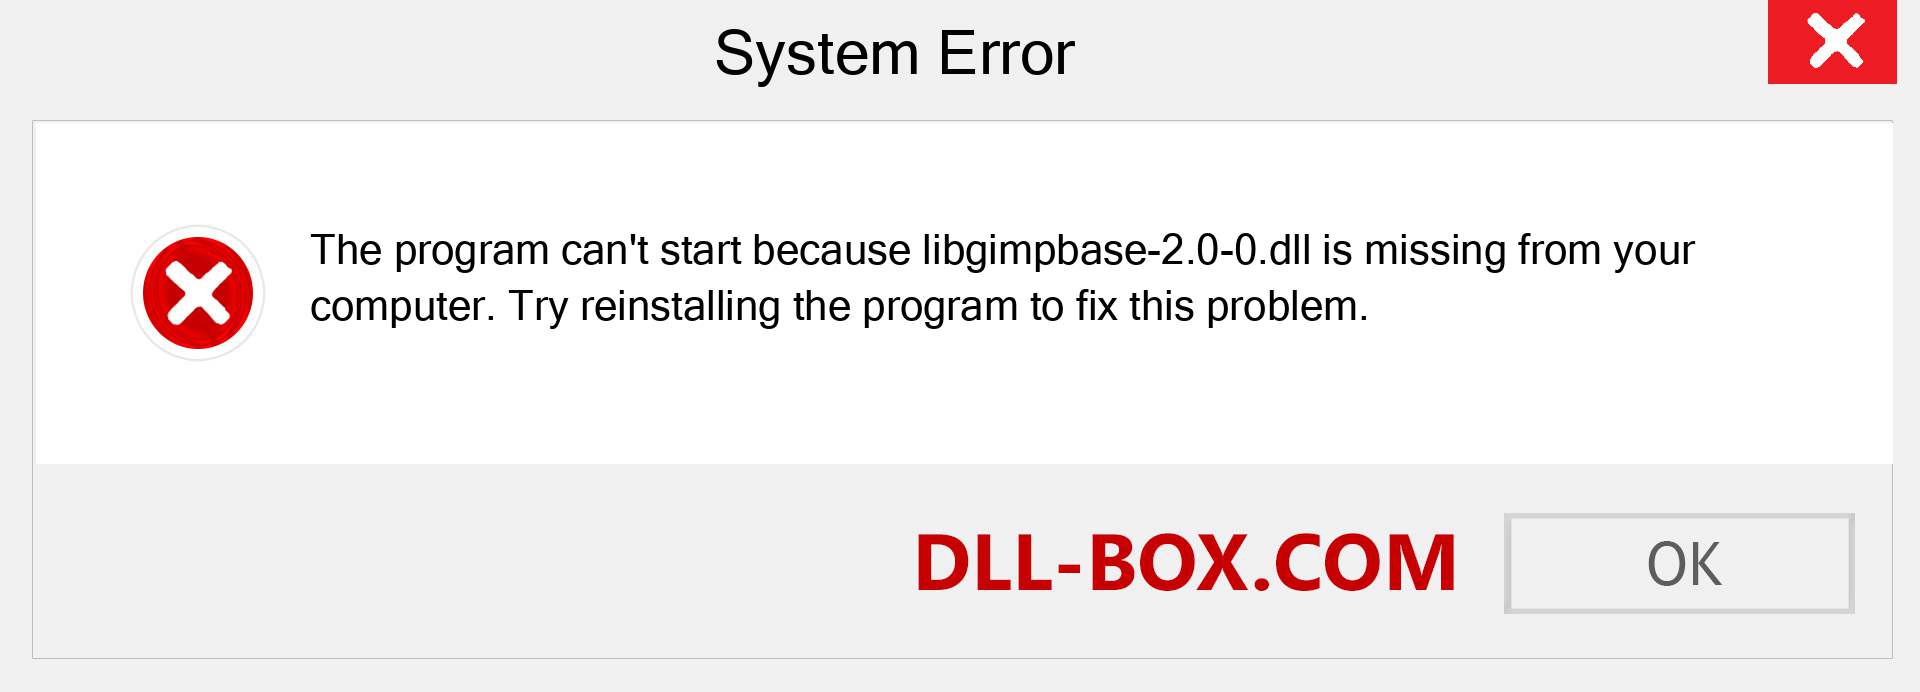  libgimpbase-2.0-0.dll file is missing?. Download for Windows 7, 8, 10 - Fix  libgimpbase-2.0-0 dll Missing Error on Windows, photos, images